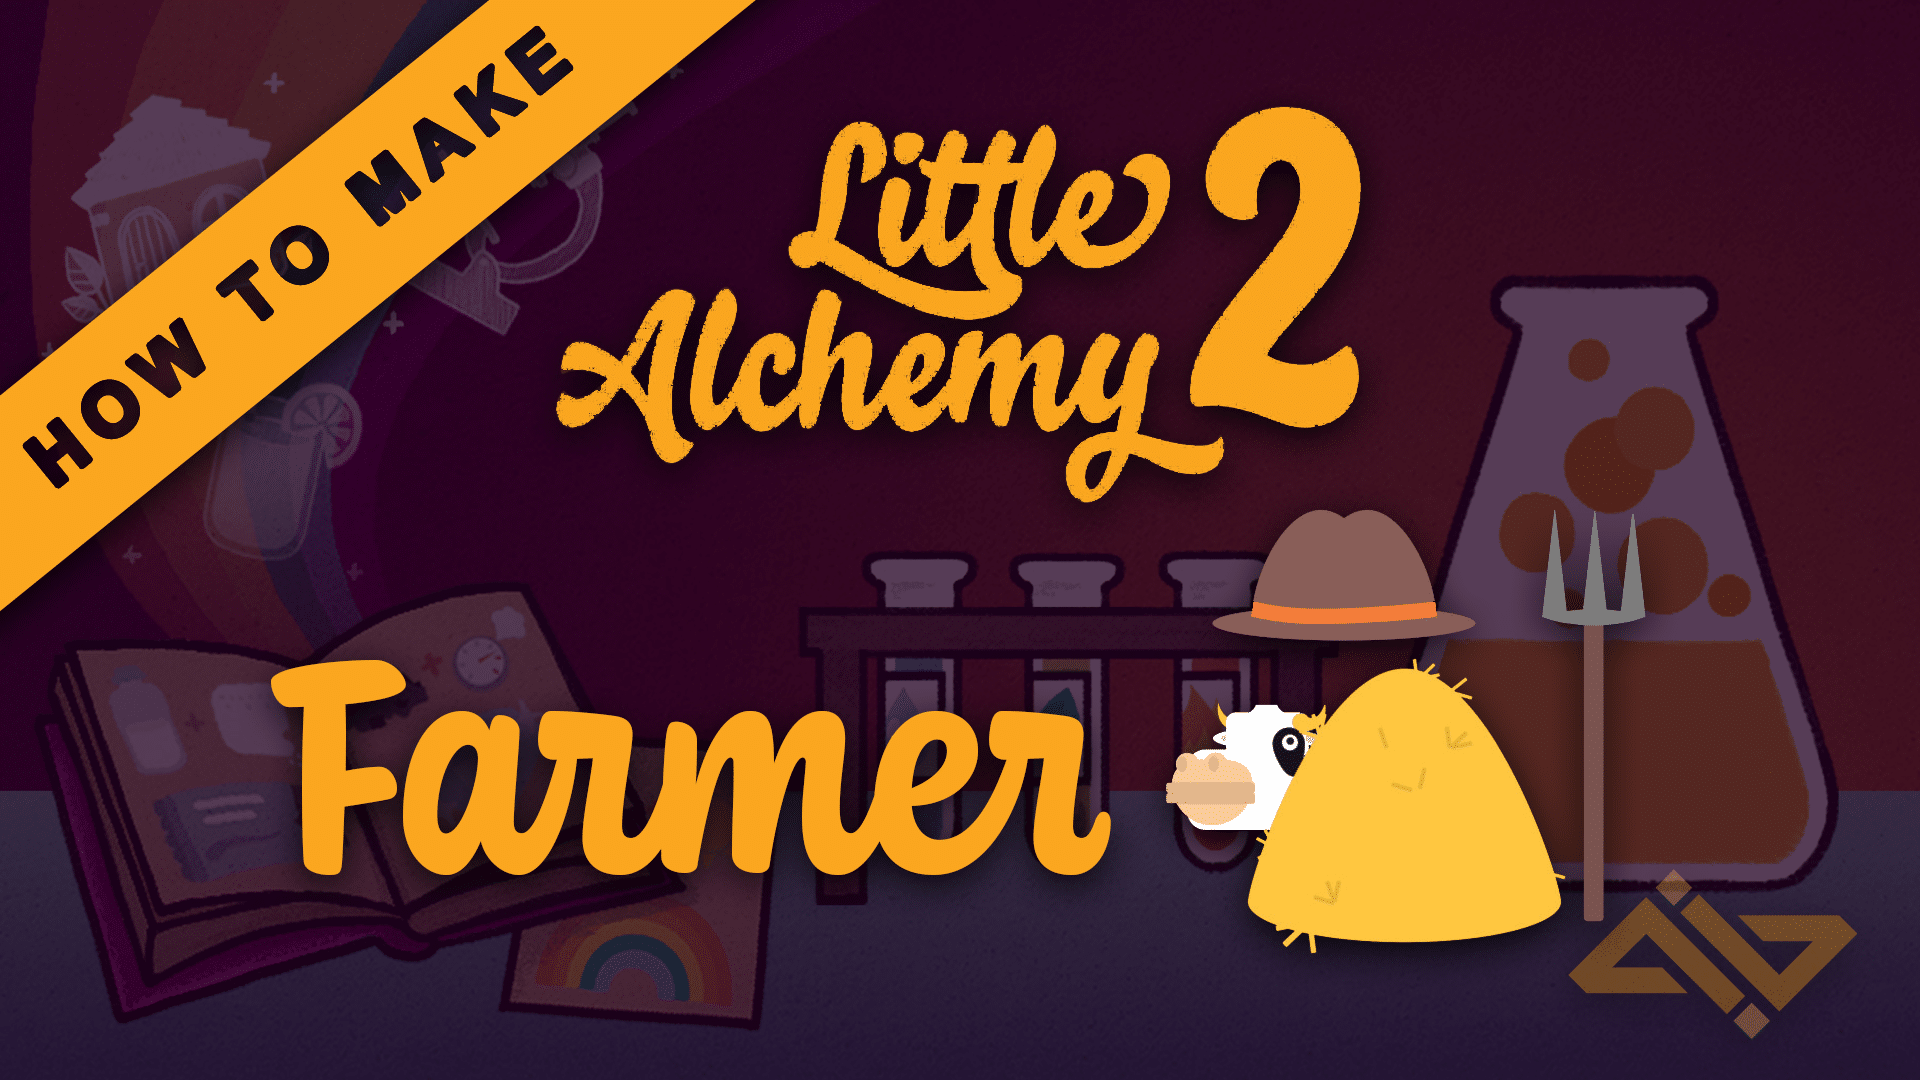 How to make a barn in Little Alchemy 2?